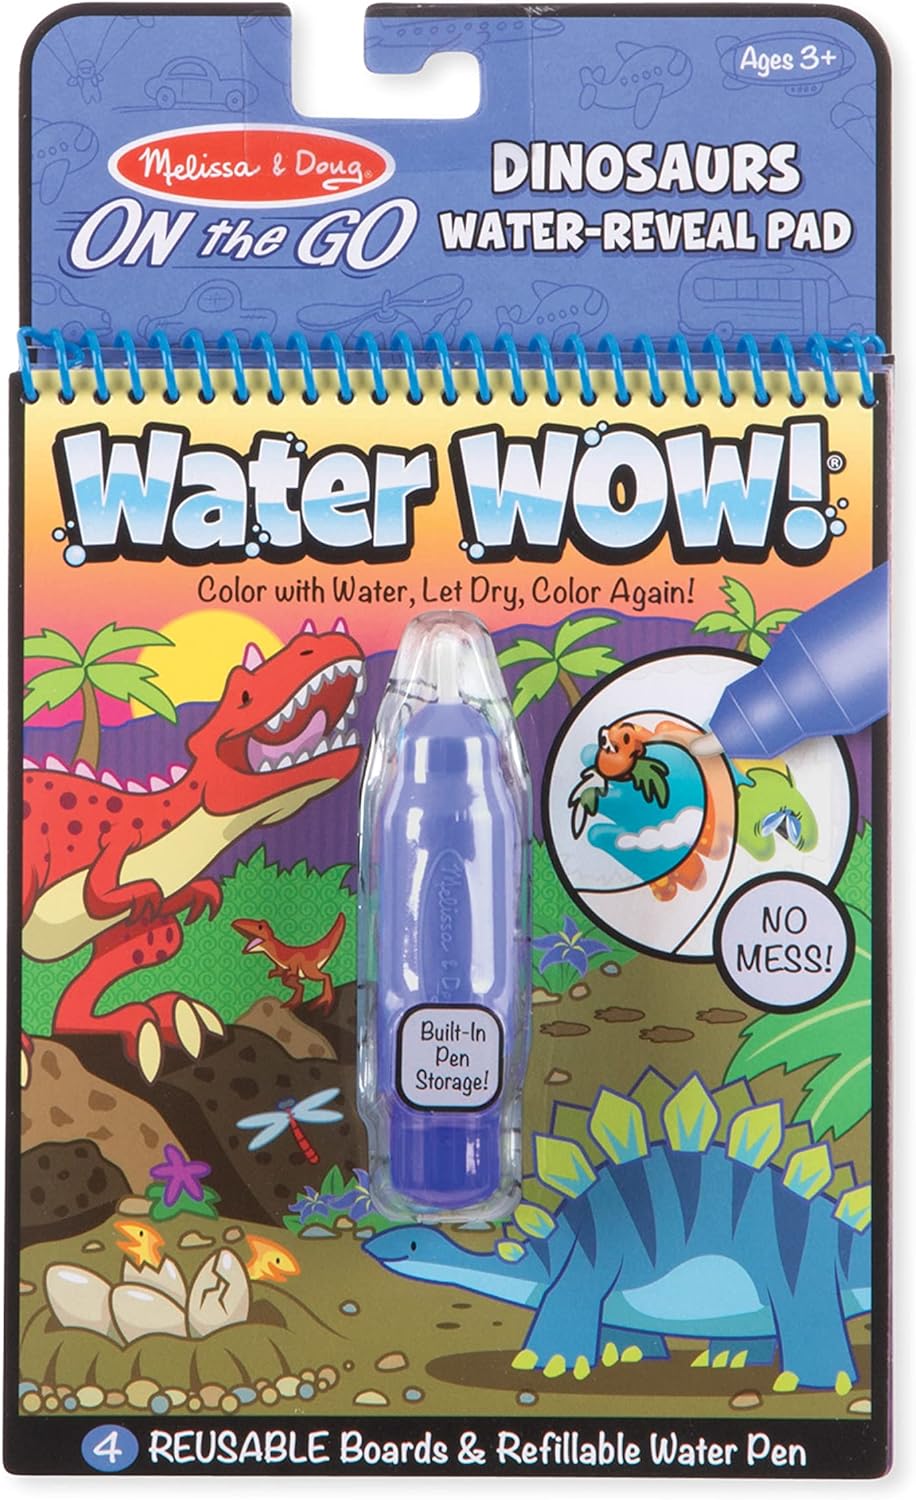 Melissa & Doug On The Go Water Wow! Reusable Water-Reveal Activity Pad – Dinsoaur Books, Stocking Stuffers, Arts And Crafts Toys For Kids Ages 3+